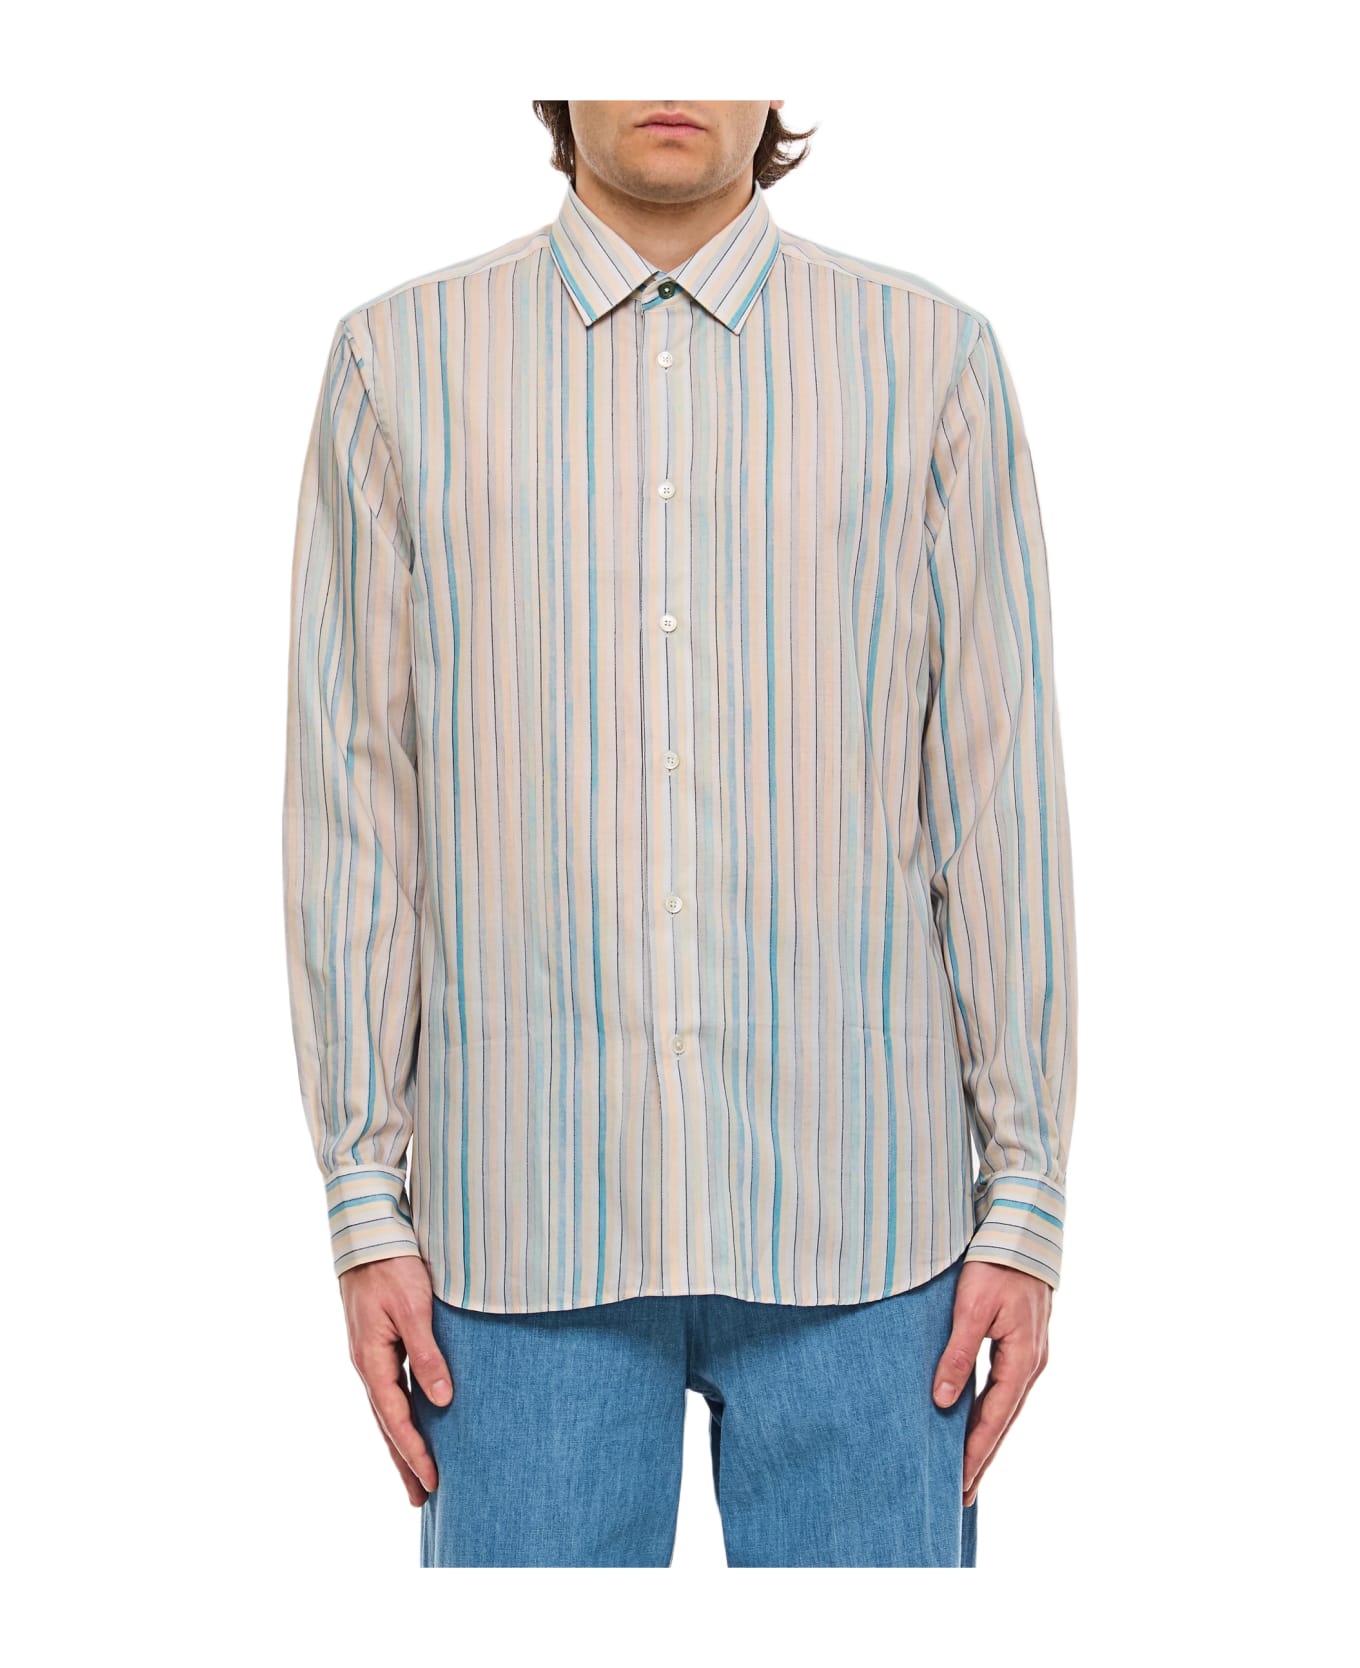 Paul Smith Tailored Fit Shirt - MultiColour シャツ